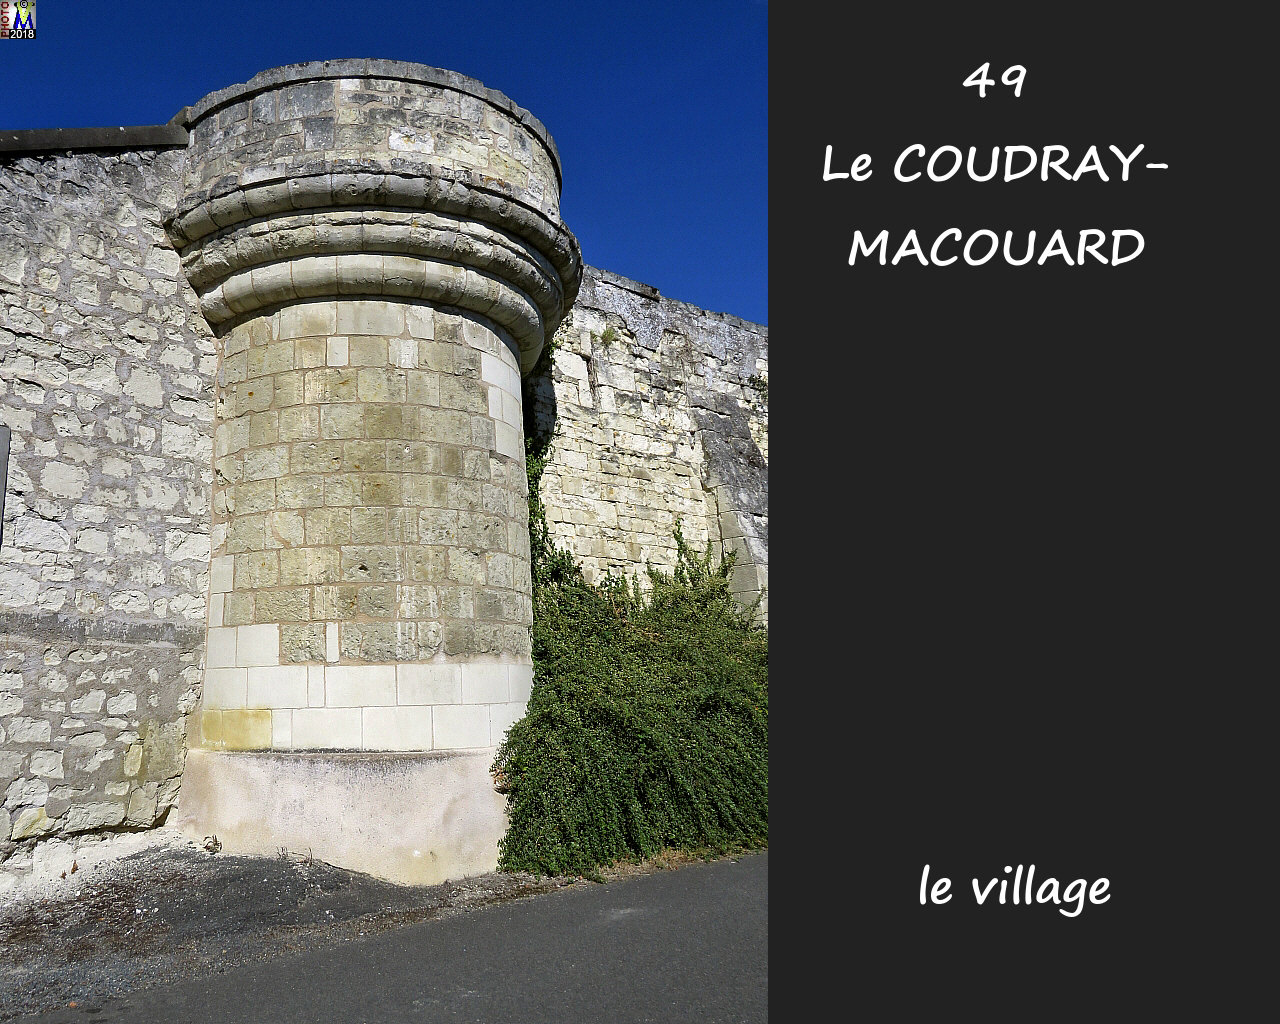 49COUDRAY-MACOUARD_village_1004.jpg